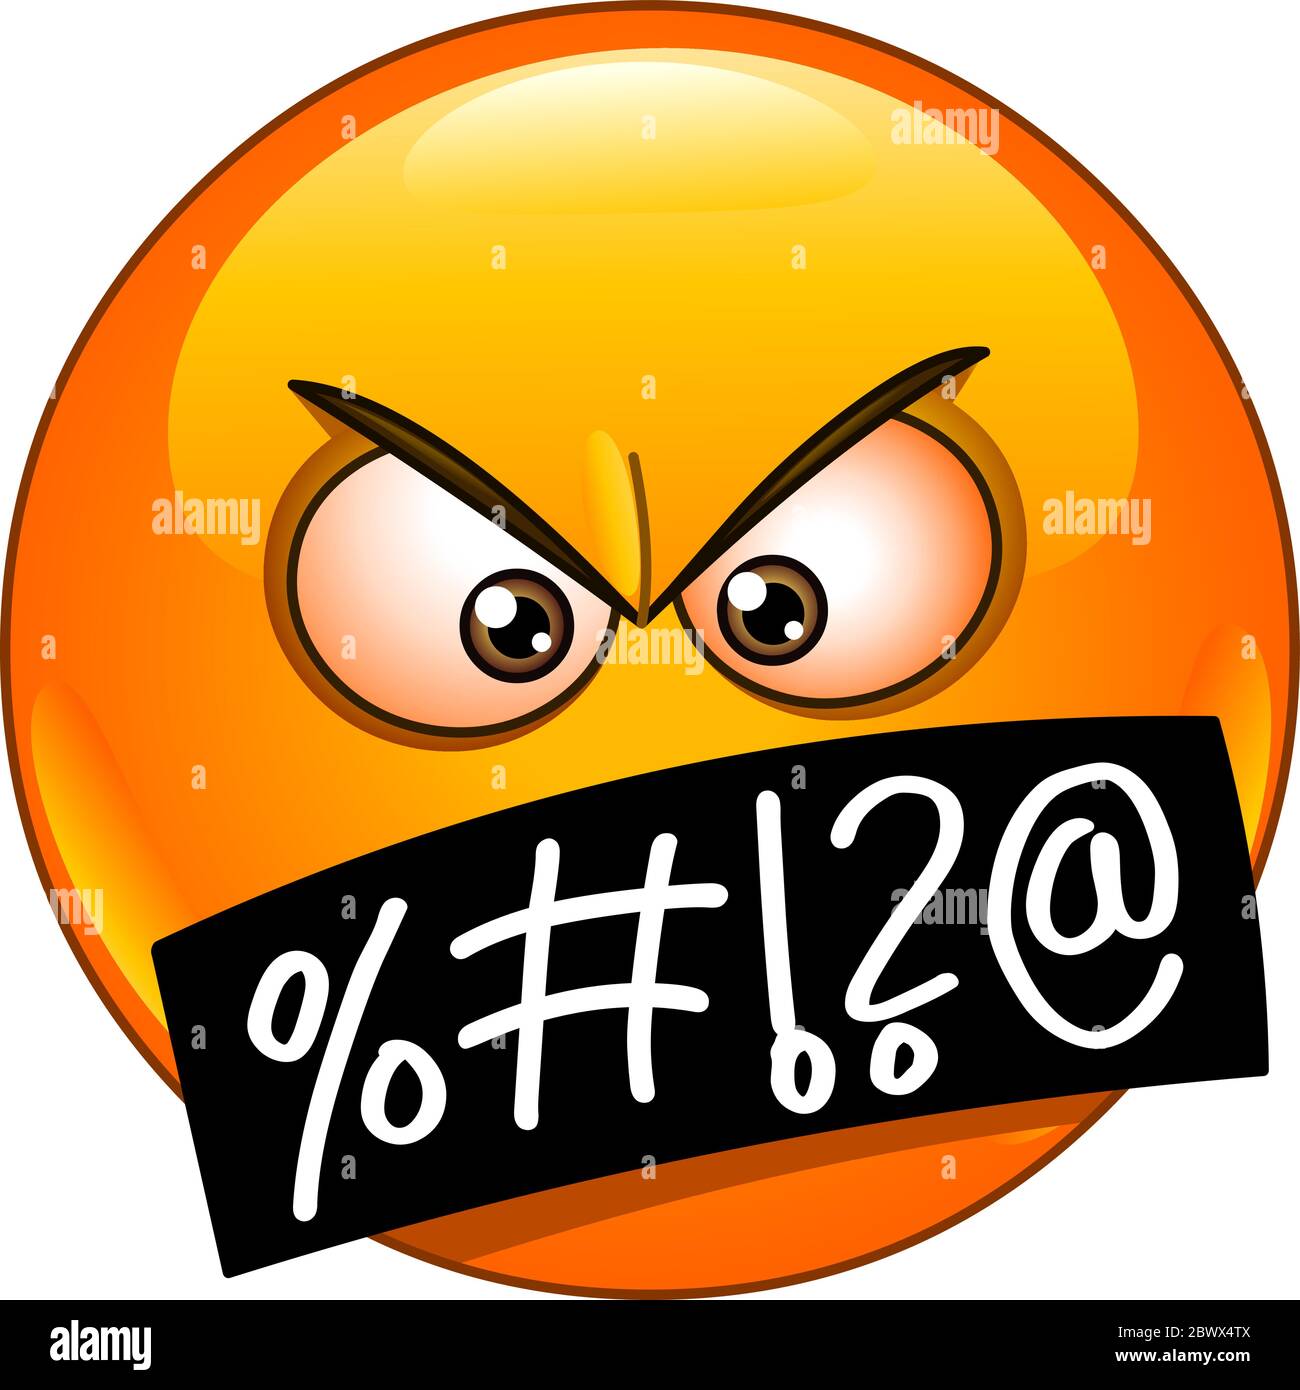 Angry emoticon face with grawlixes symbols on mouth Stock Vector